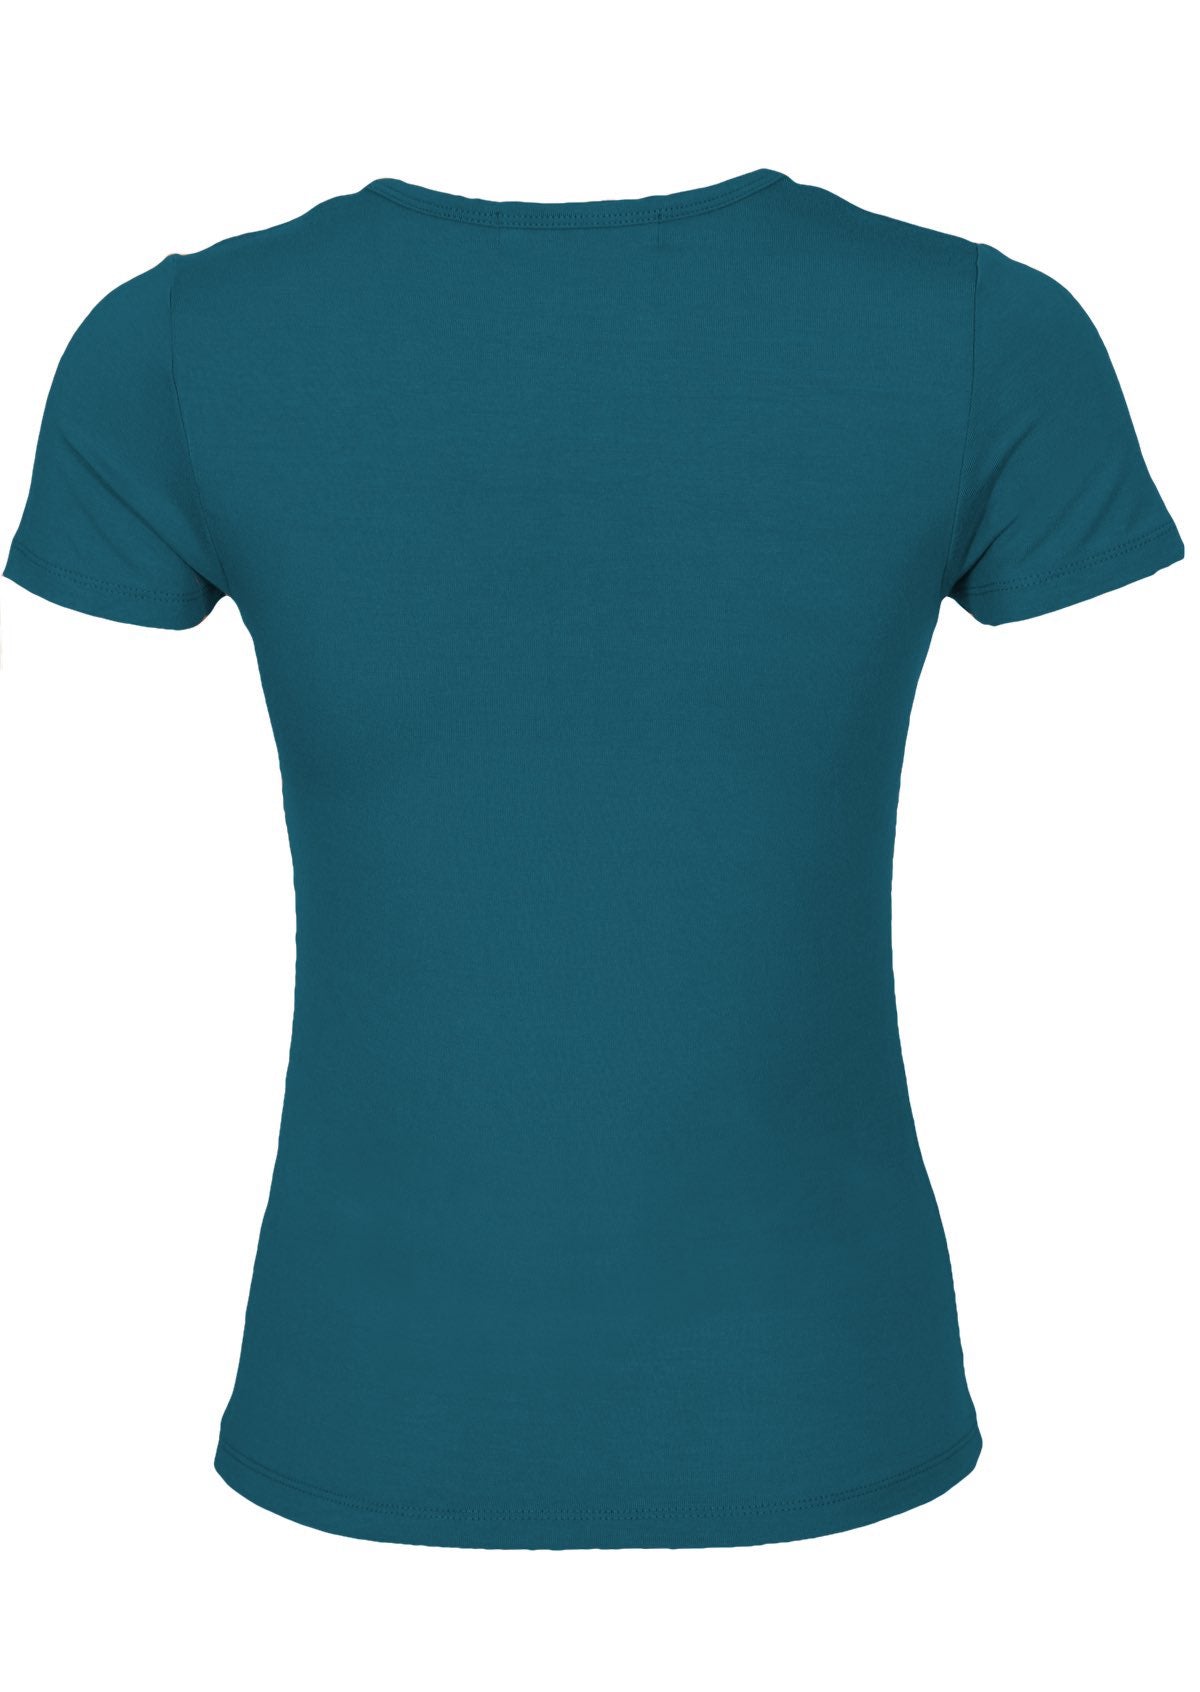 back view fitted basic women's top